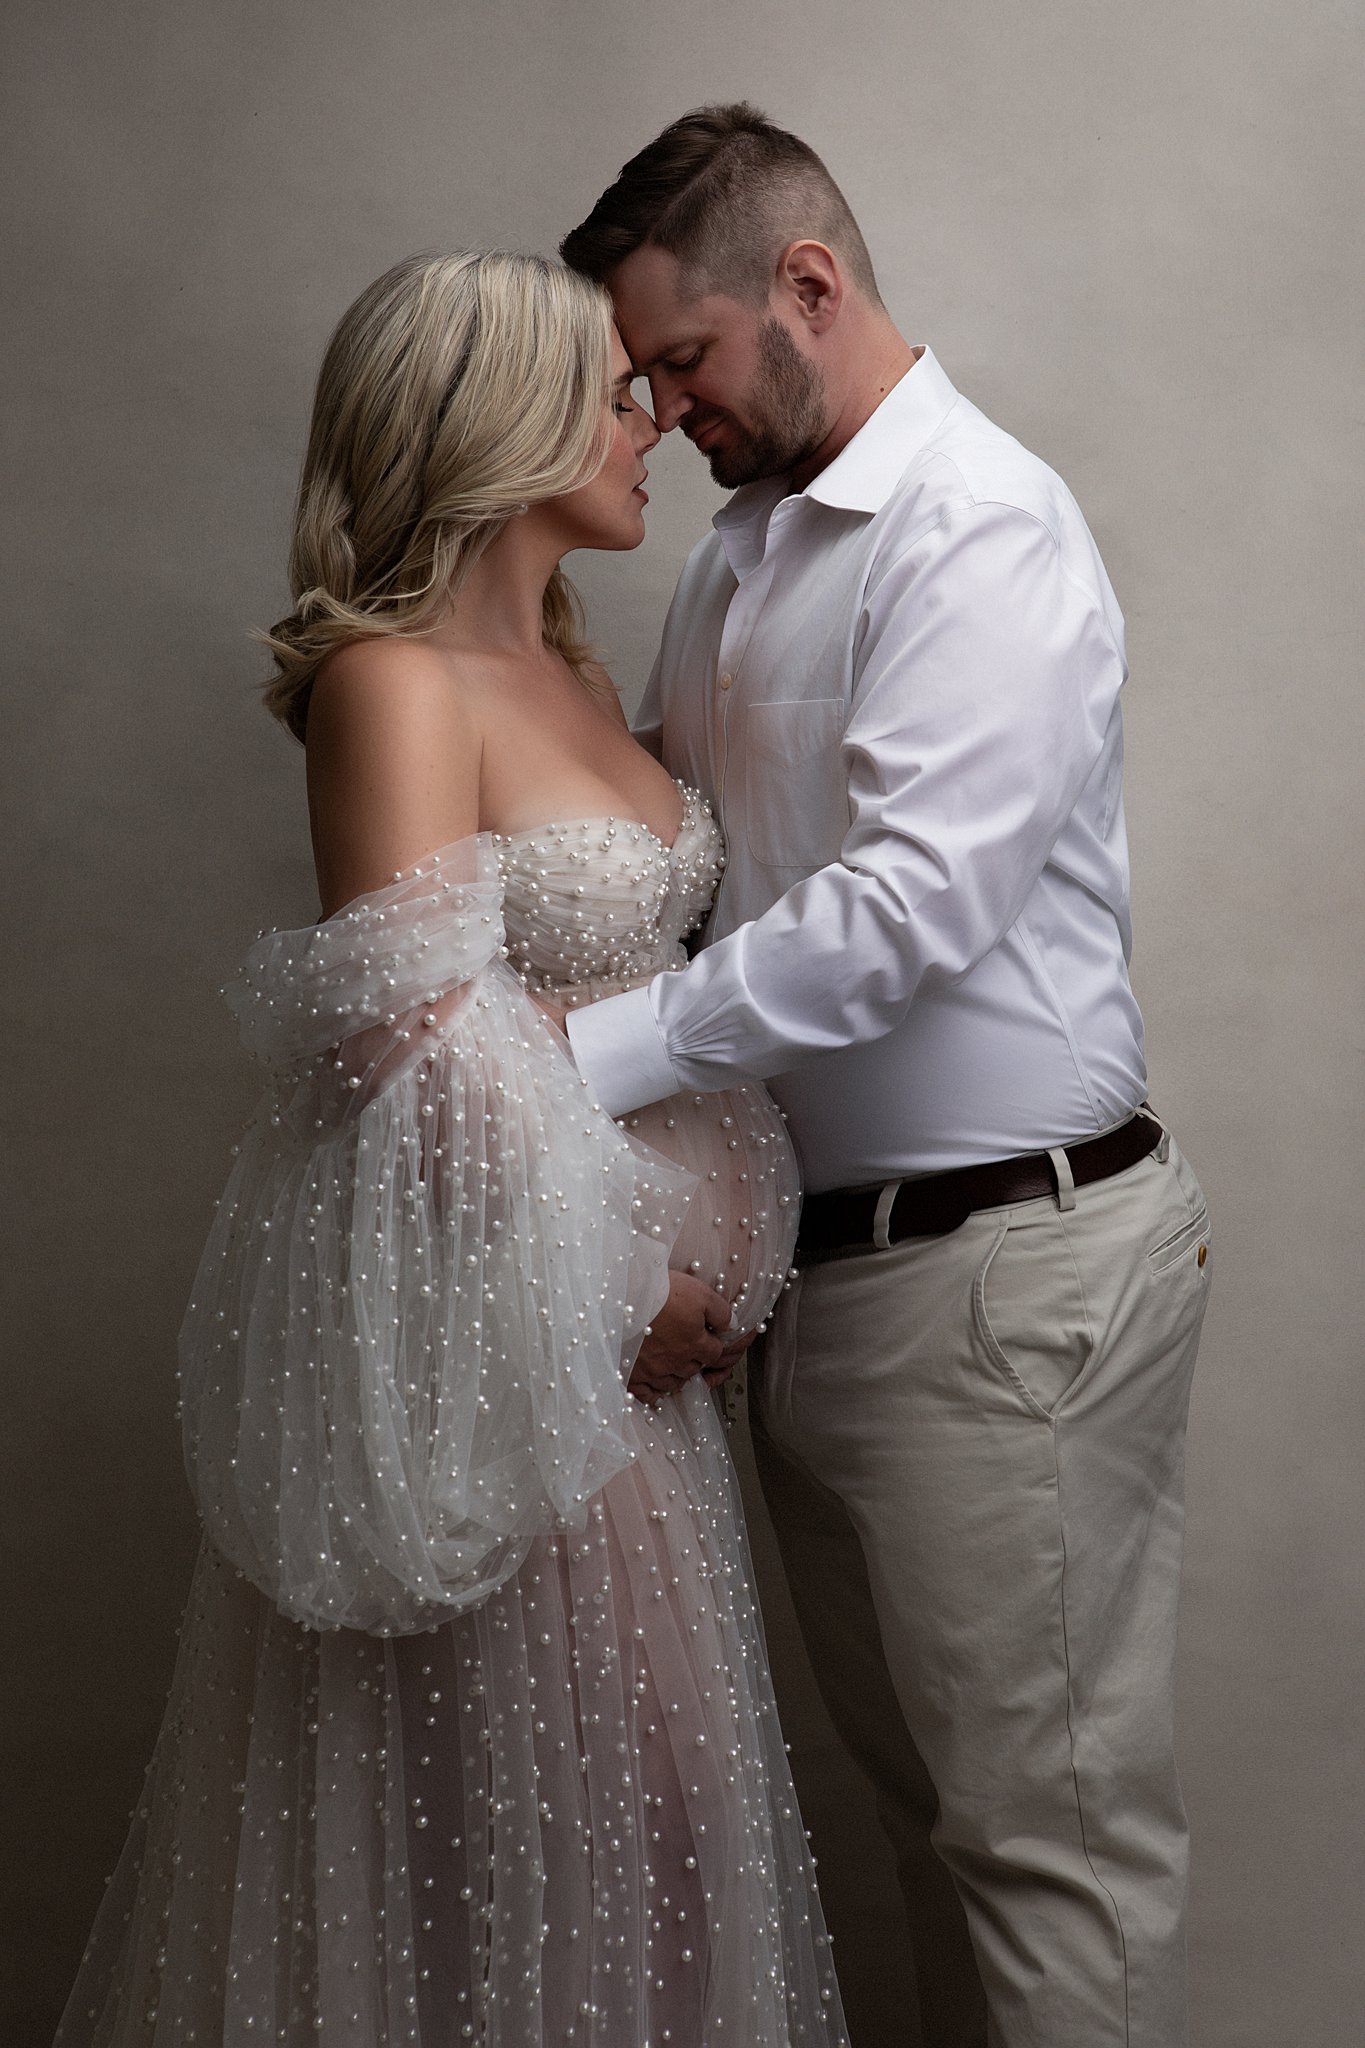 A soon to be father hugs onto his pregnant wife in a sheer maternity gown